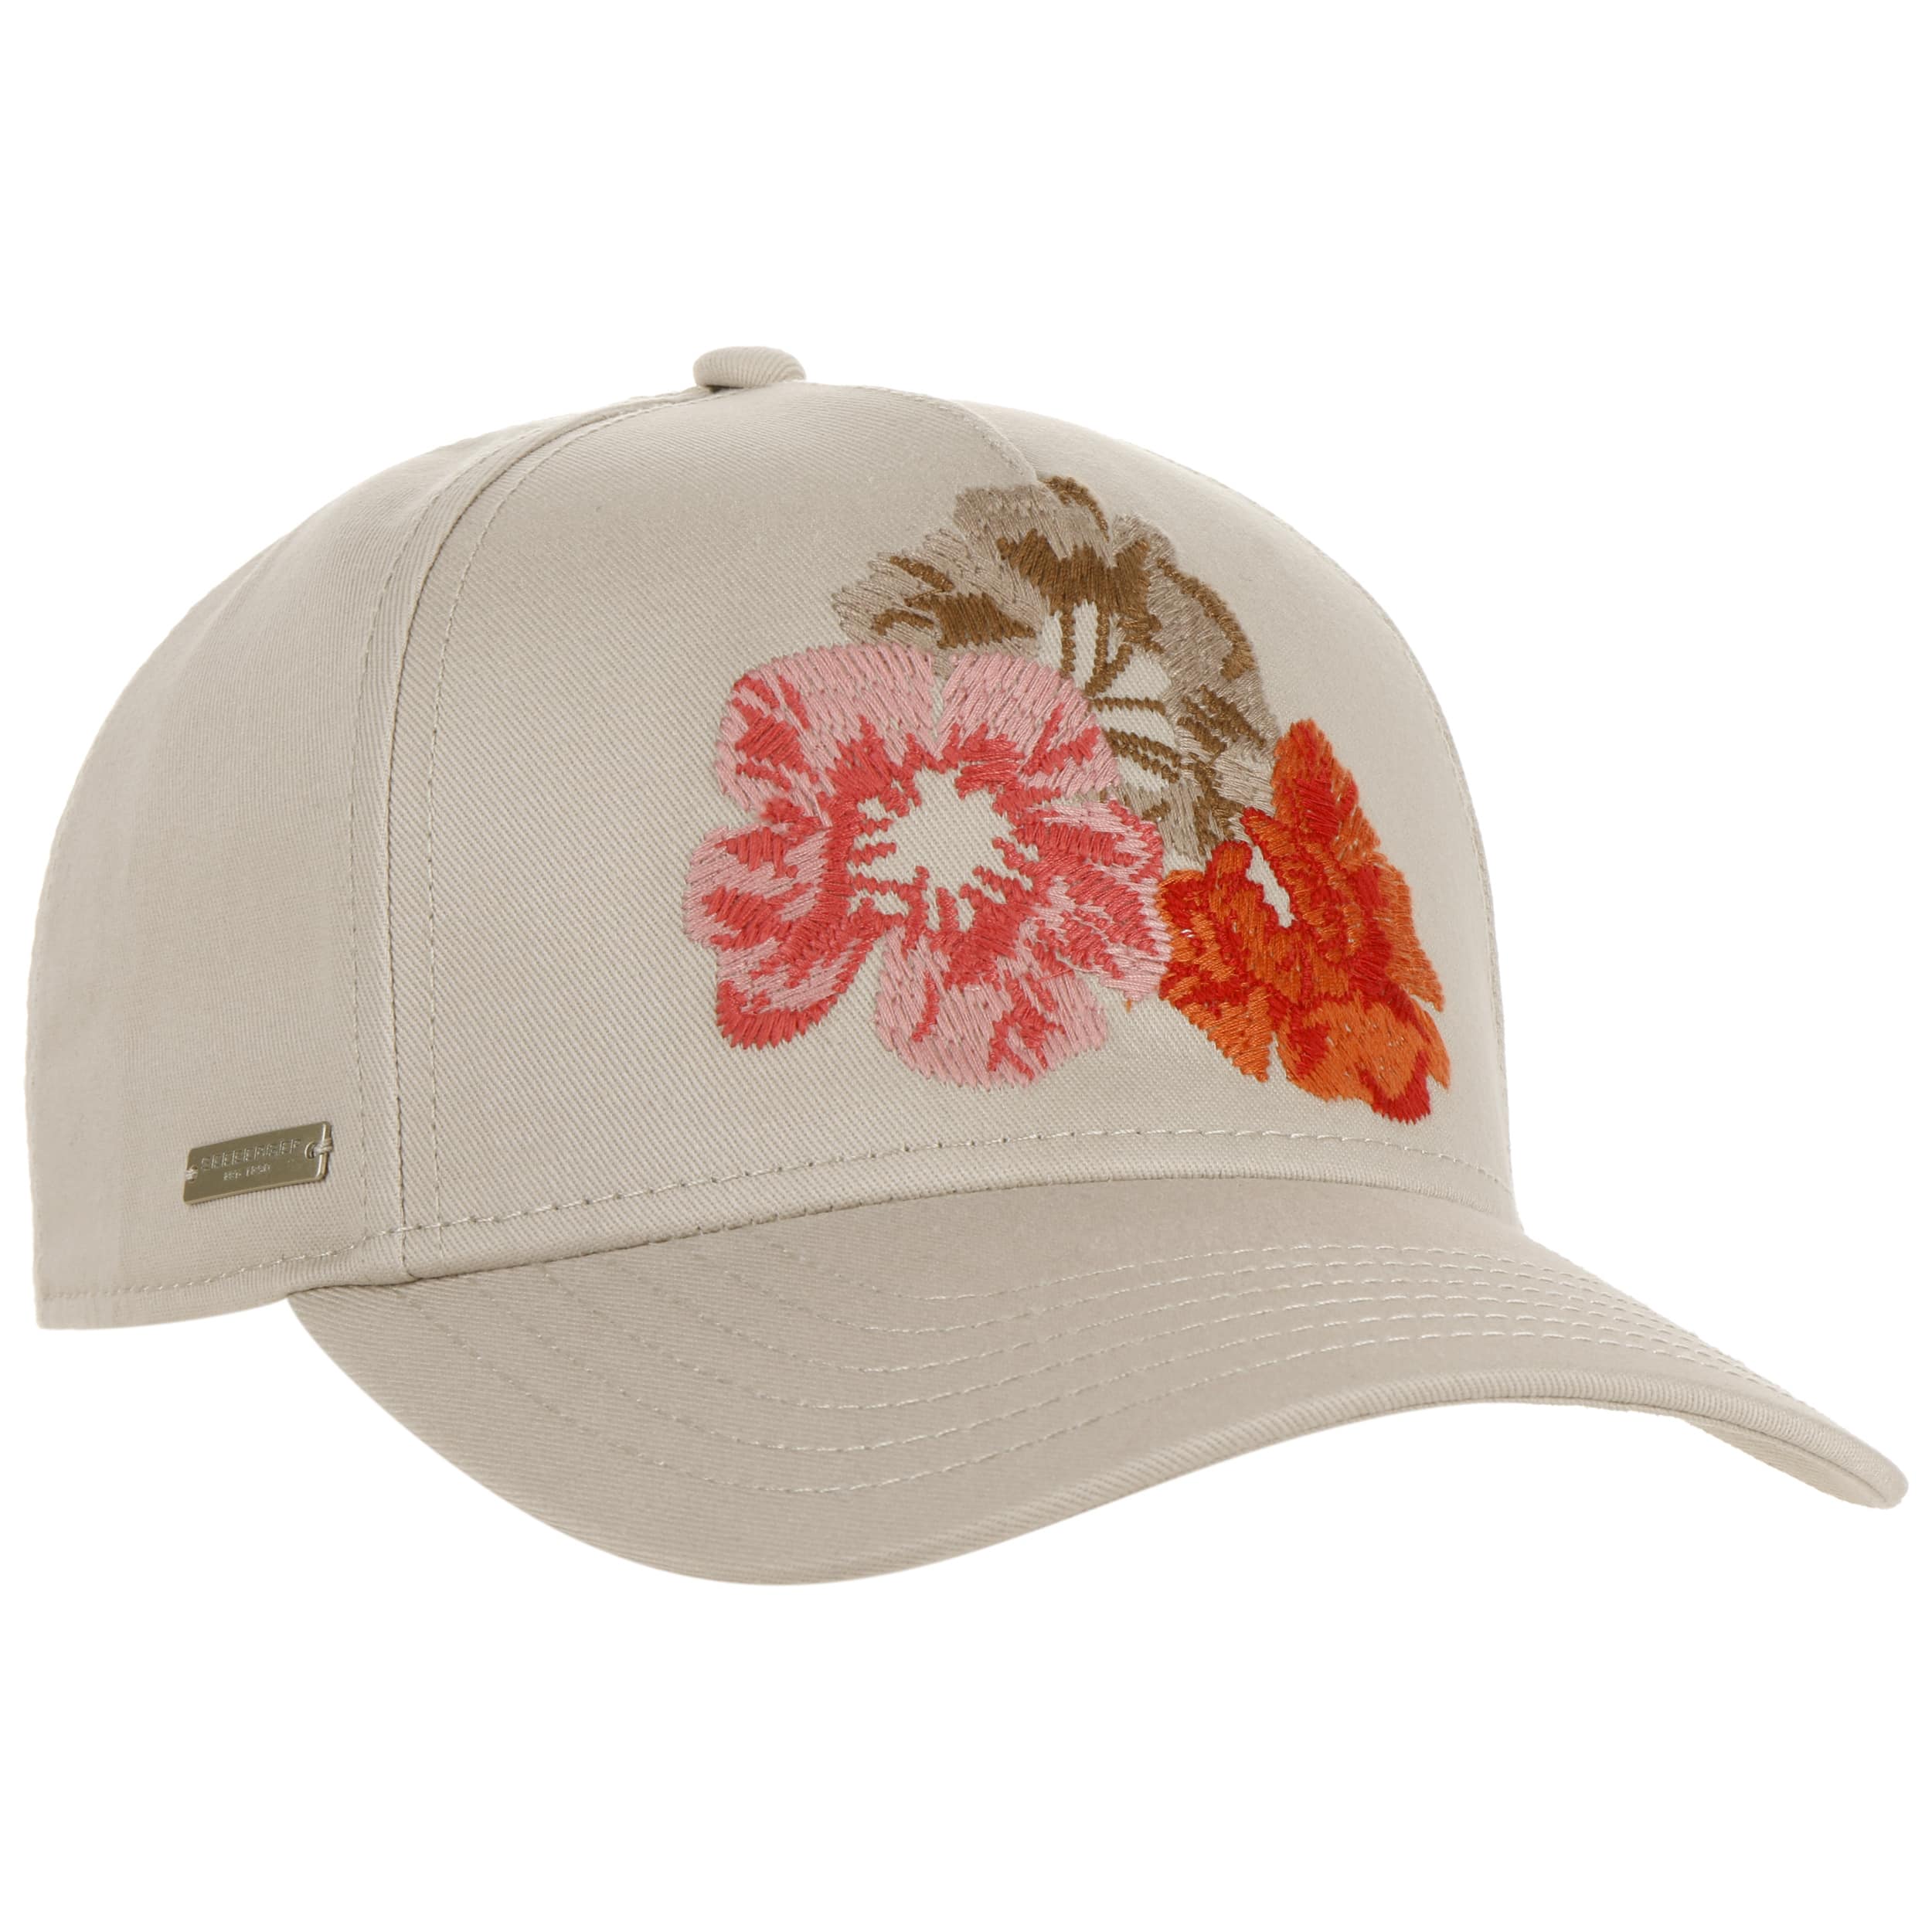 Stitched Flowers Cap by - 29,95 € Seeberger